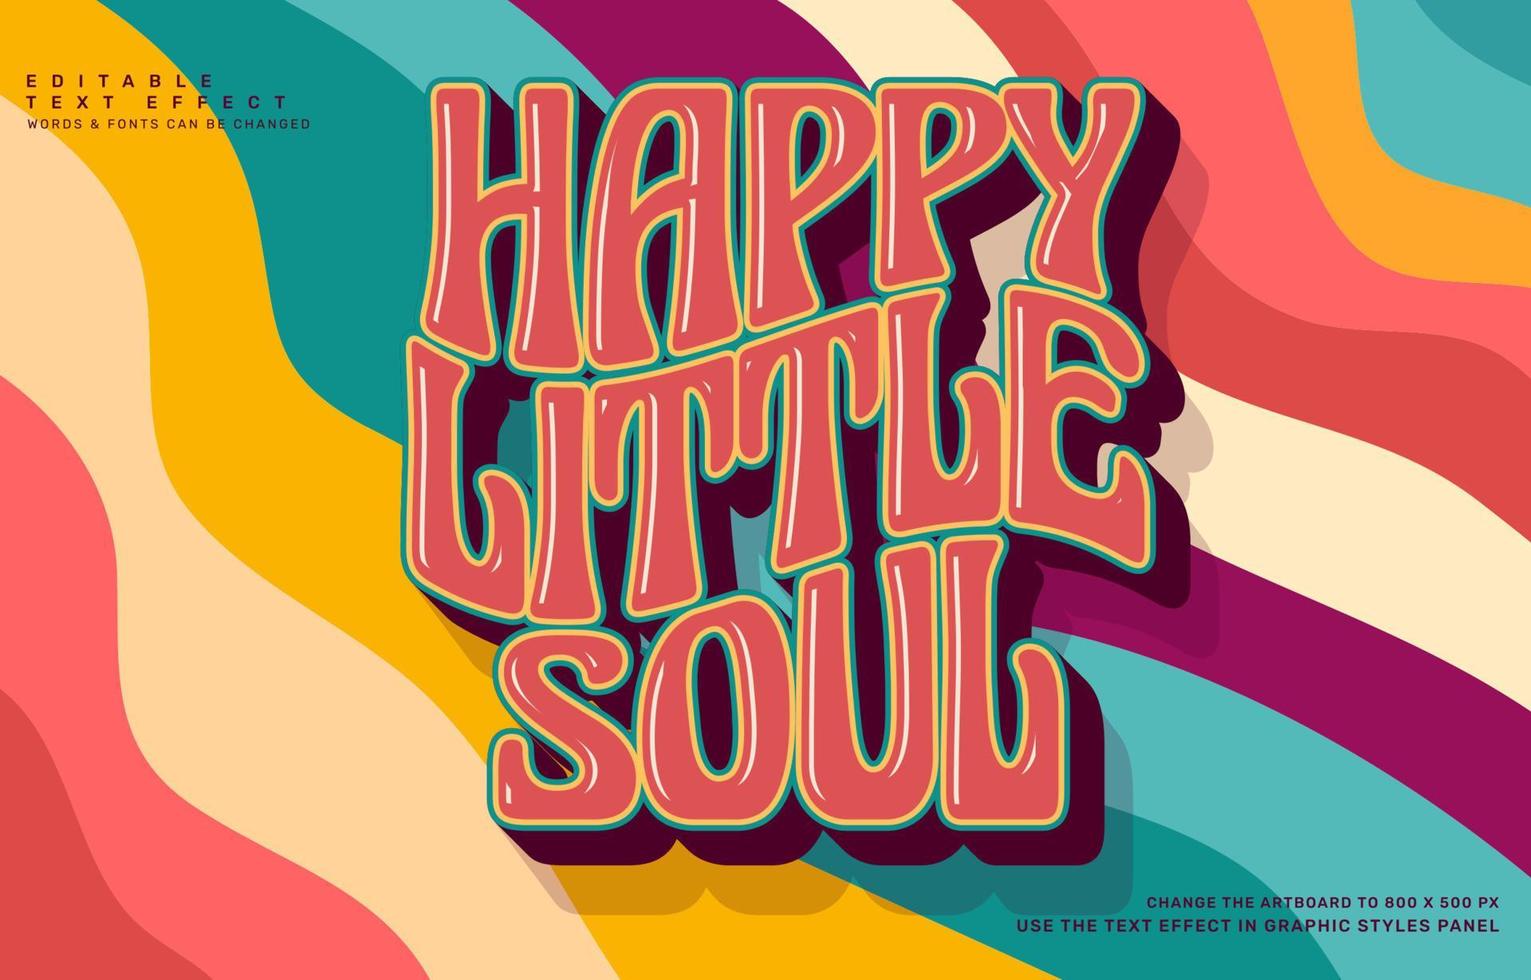 Happy little soul, groovy quote editable text effect template vector